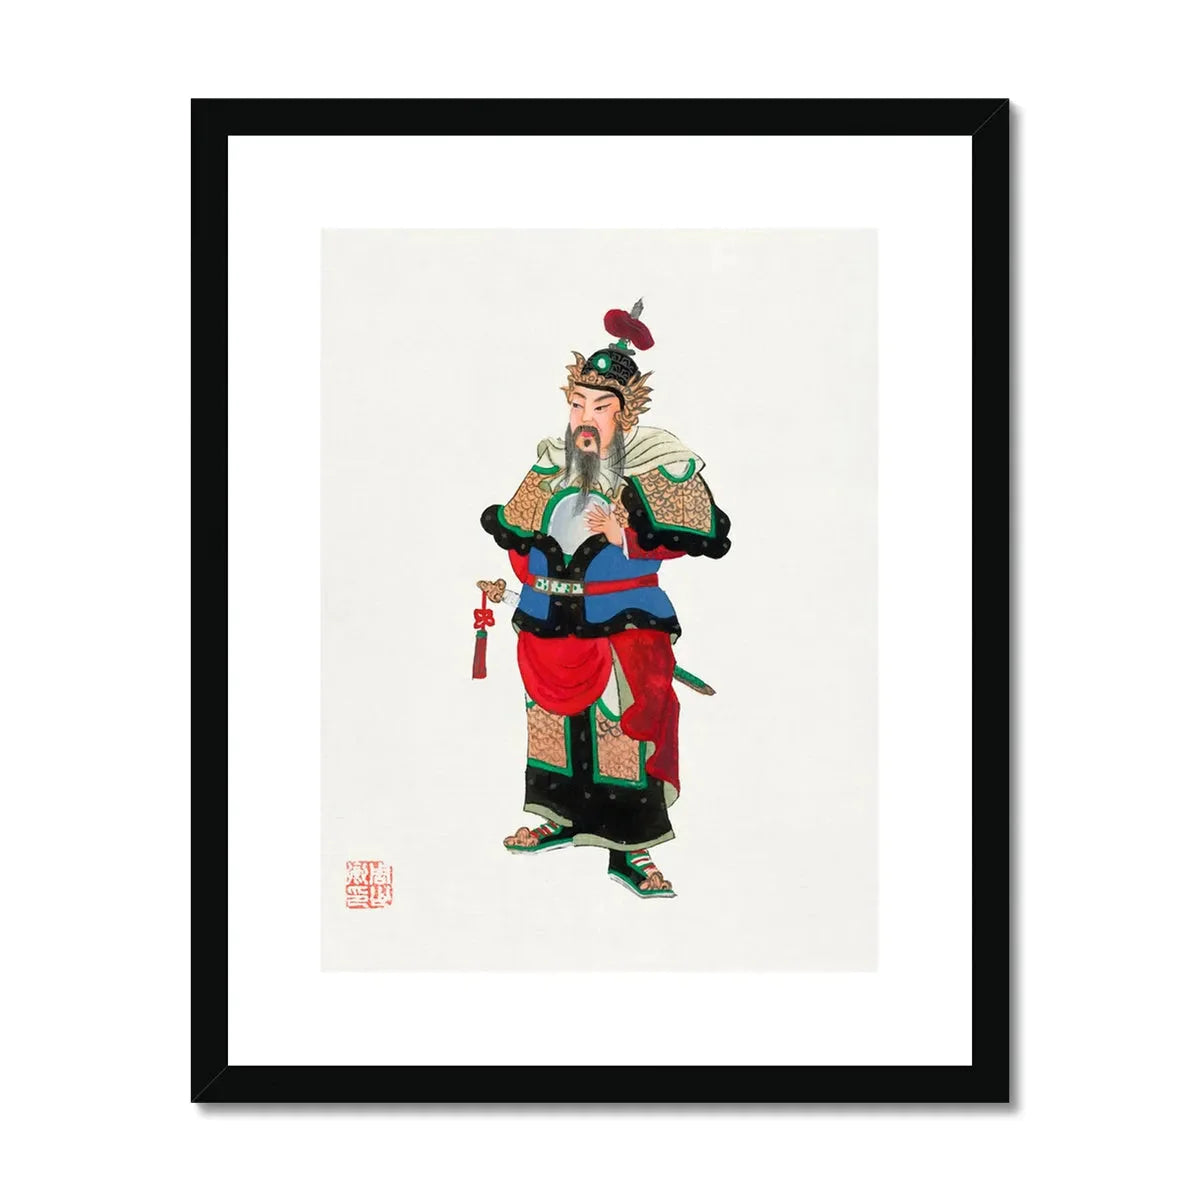 Chinese Military Commander Framed & Mounted Print - 16’x20’ / Black Frame - Posters Prints & Visual Artwork